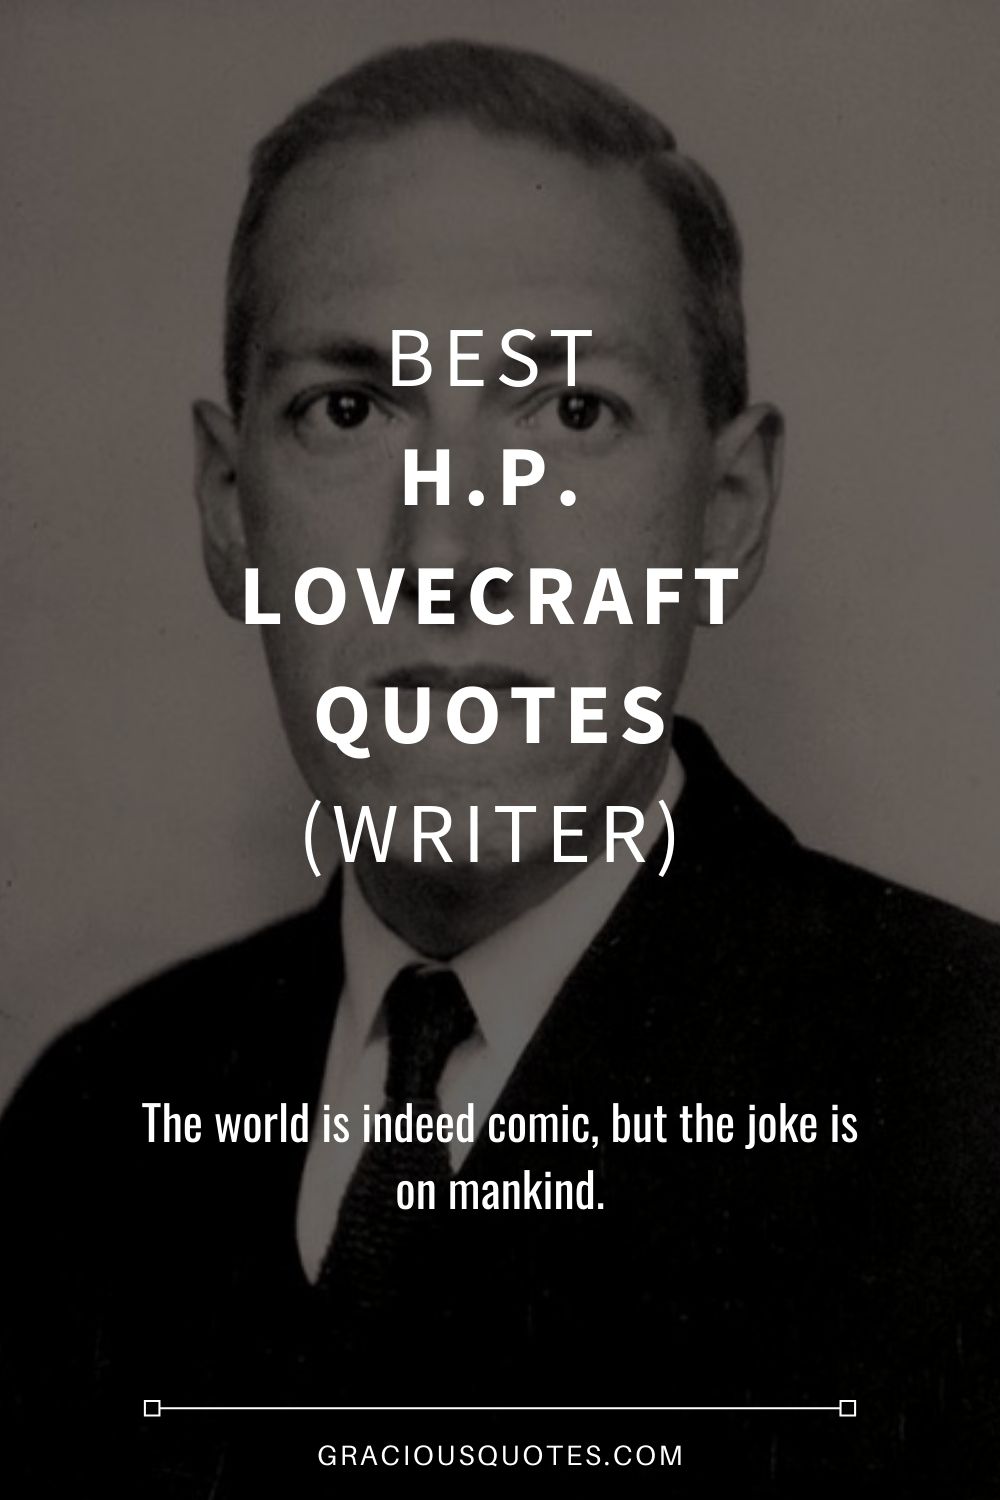 Best H.P. Lovecraft Quotes (WRITER) - Gracious Quotes